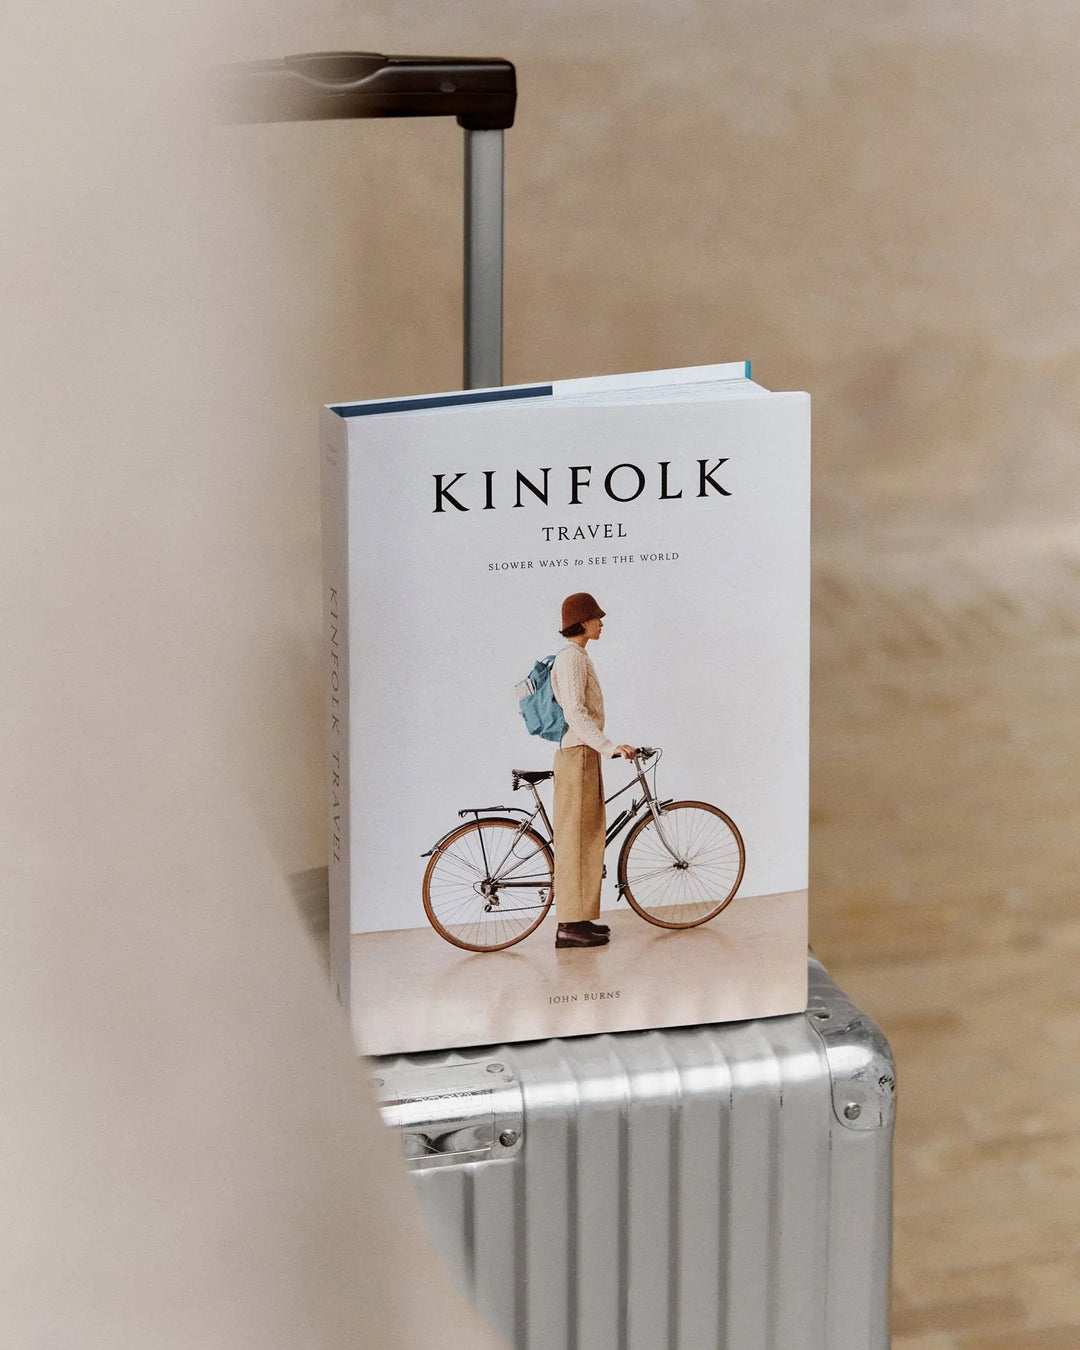 New Mags - Kinfolk - The Kinfolk Travel New Mags